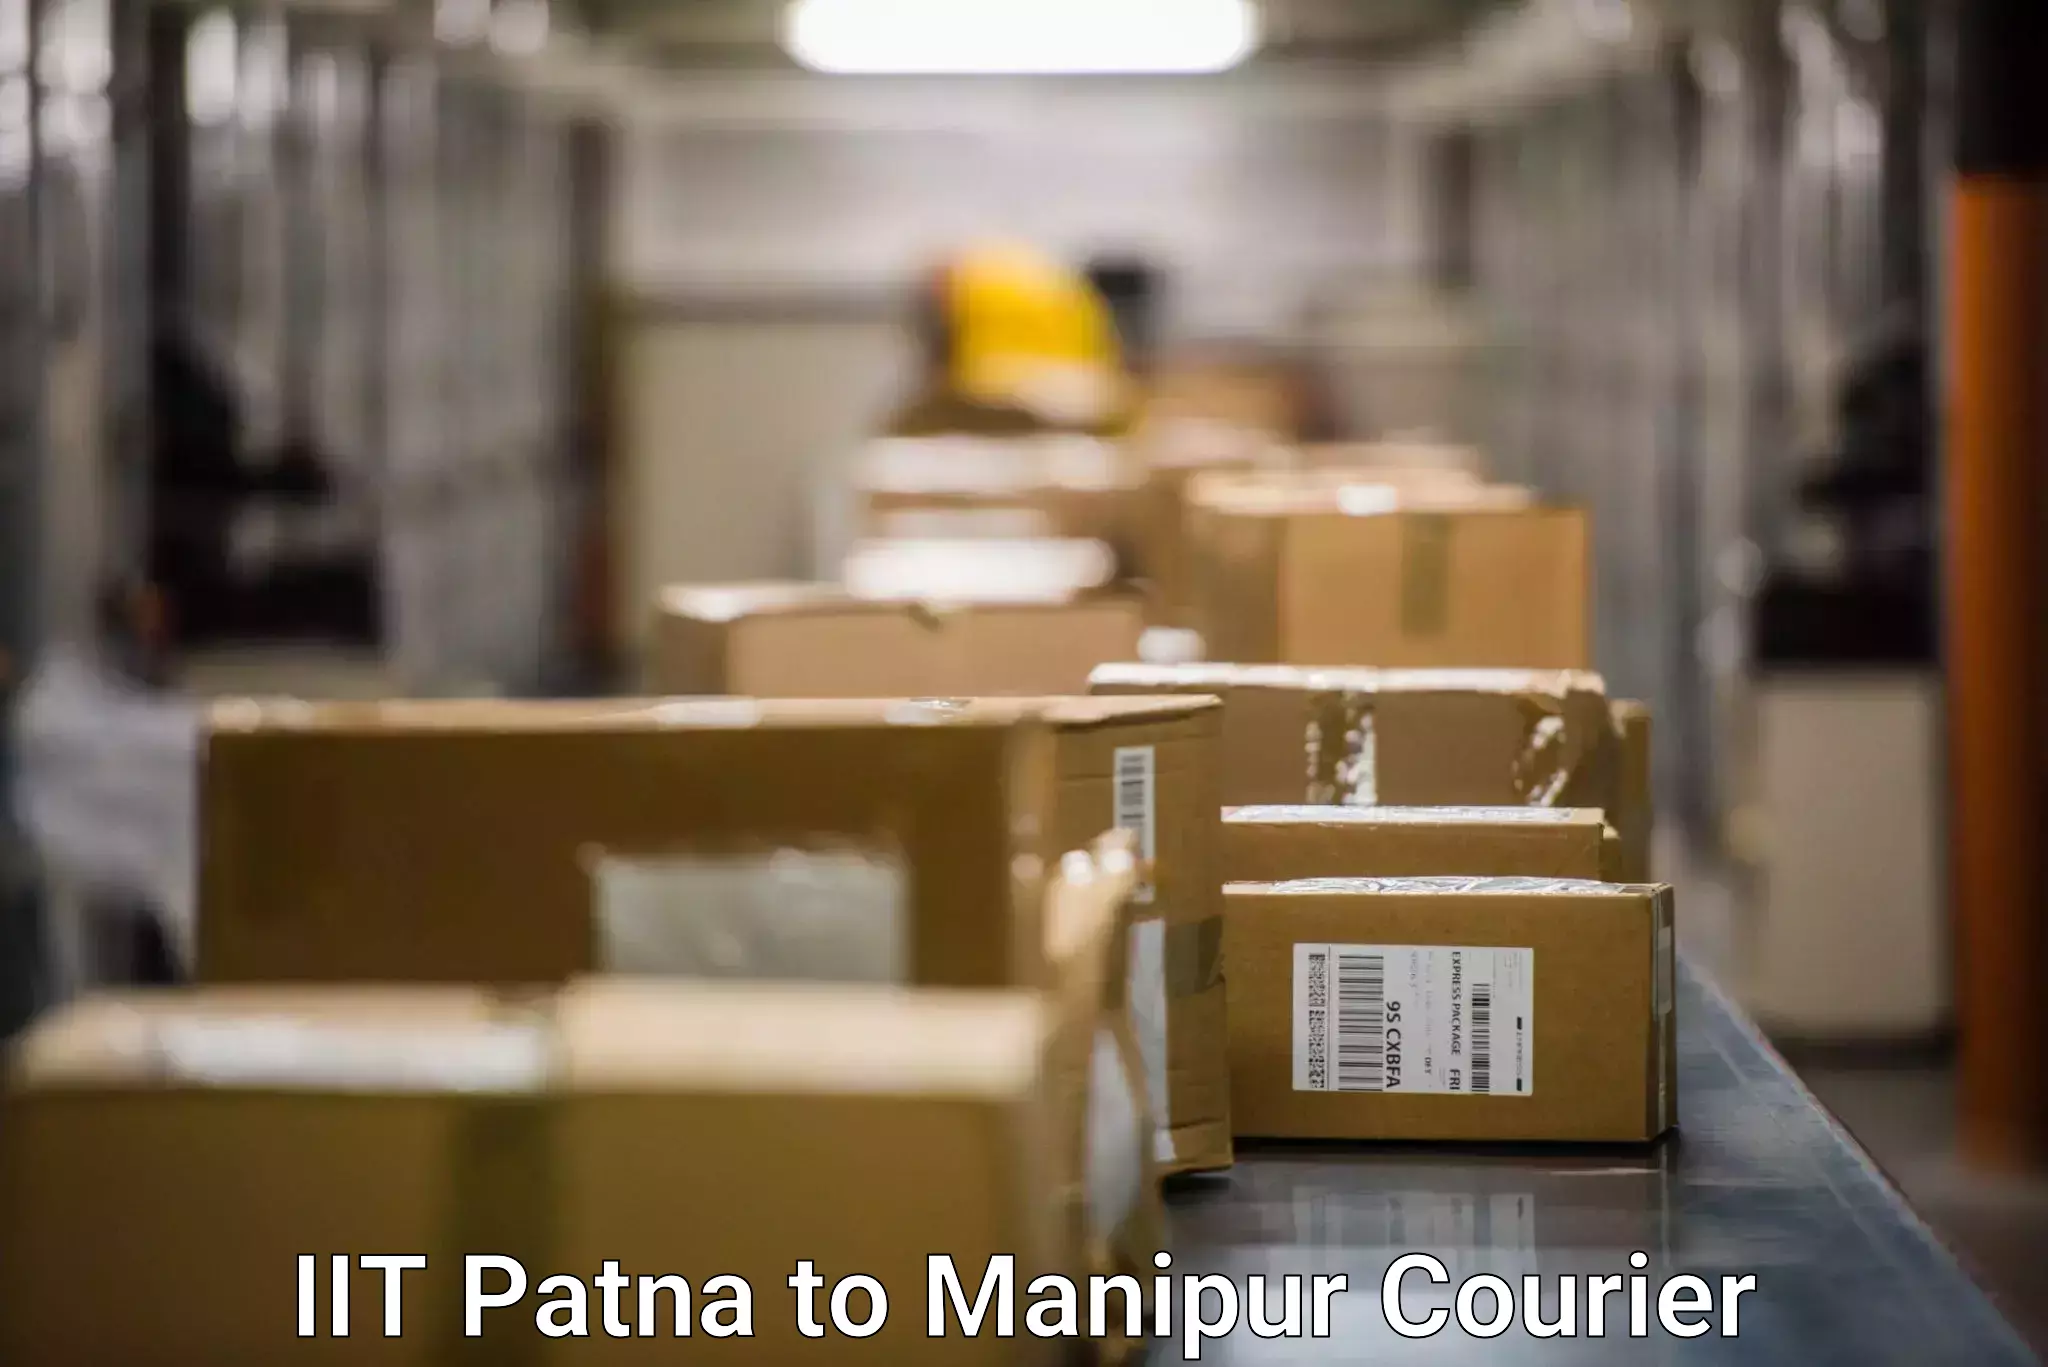 Delivery service partnership IIT Patna to Imphal